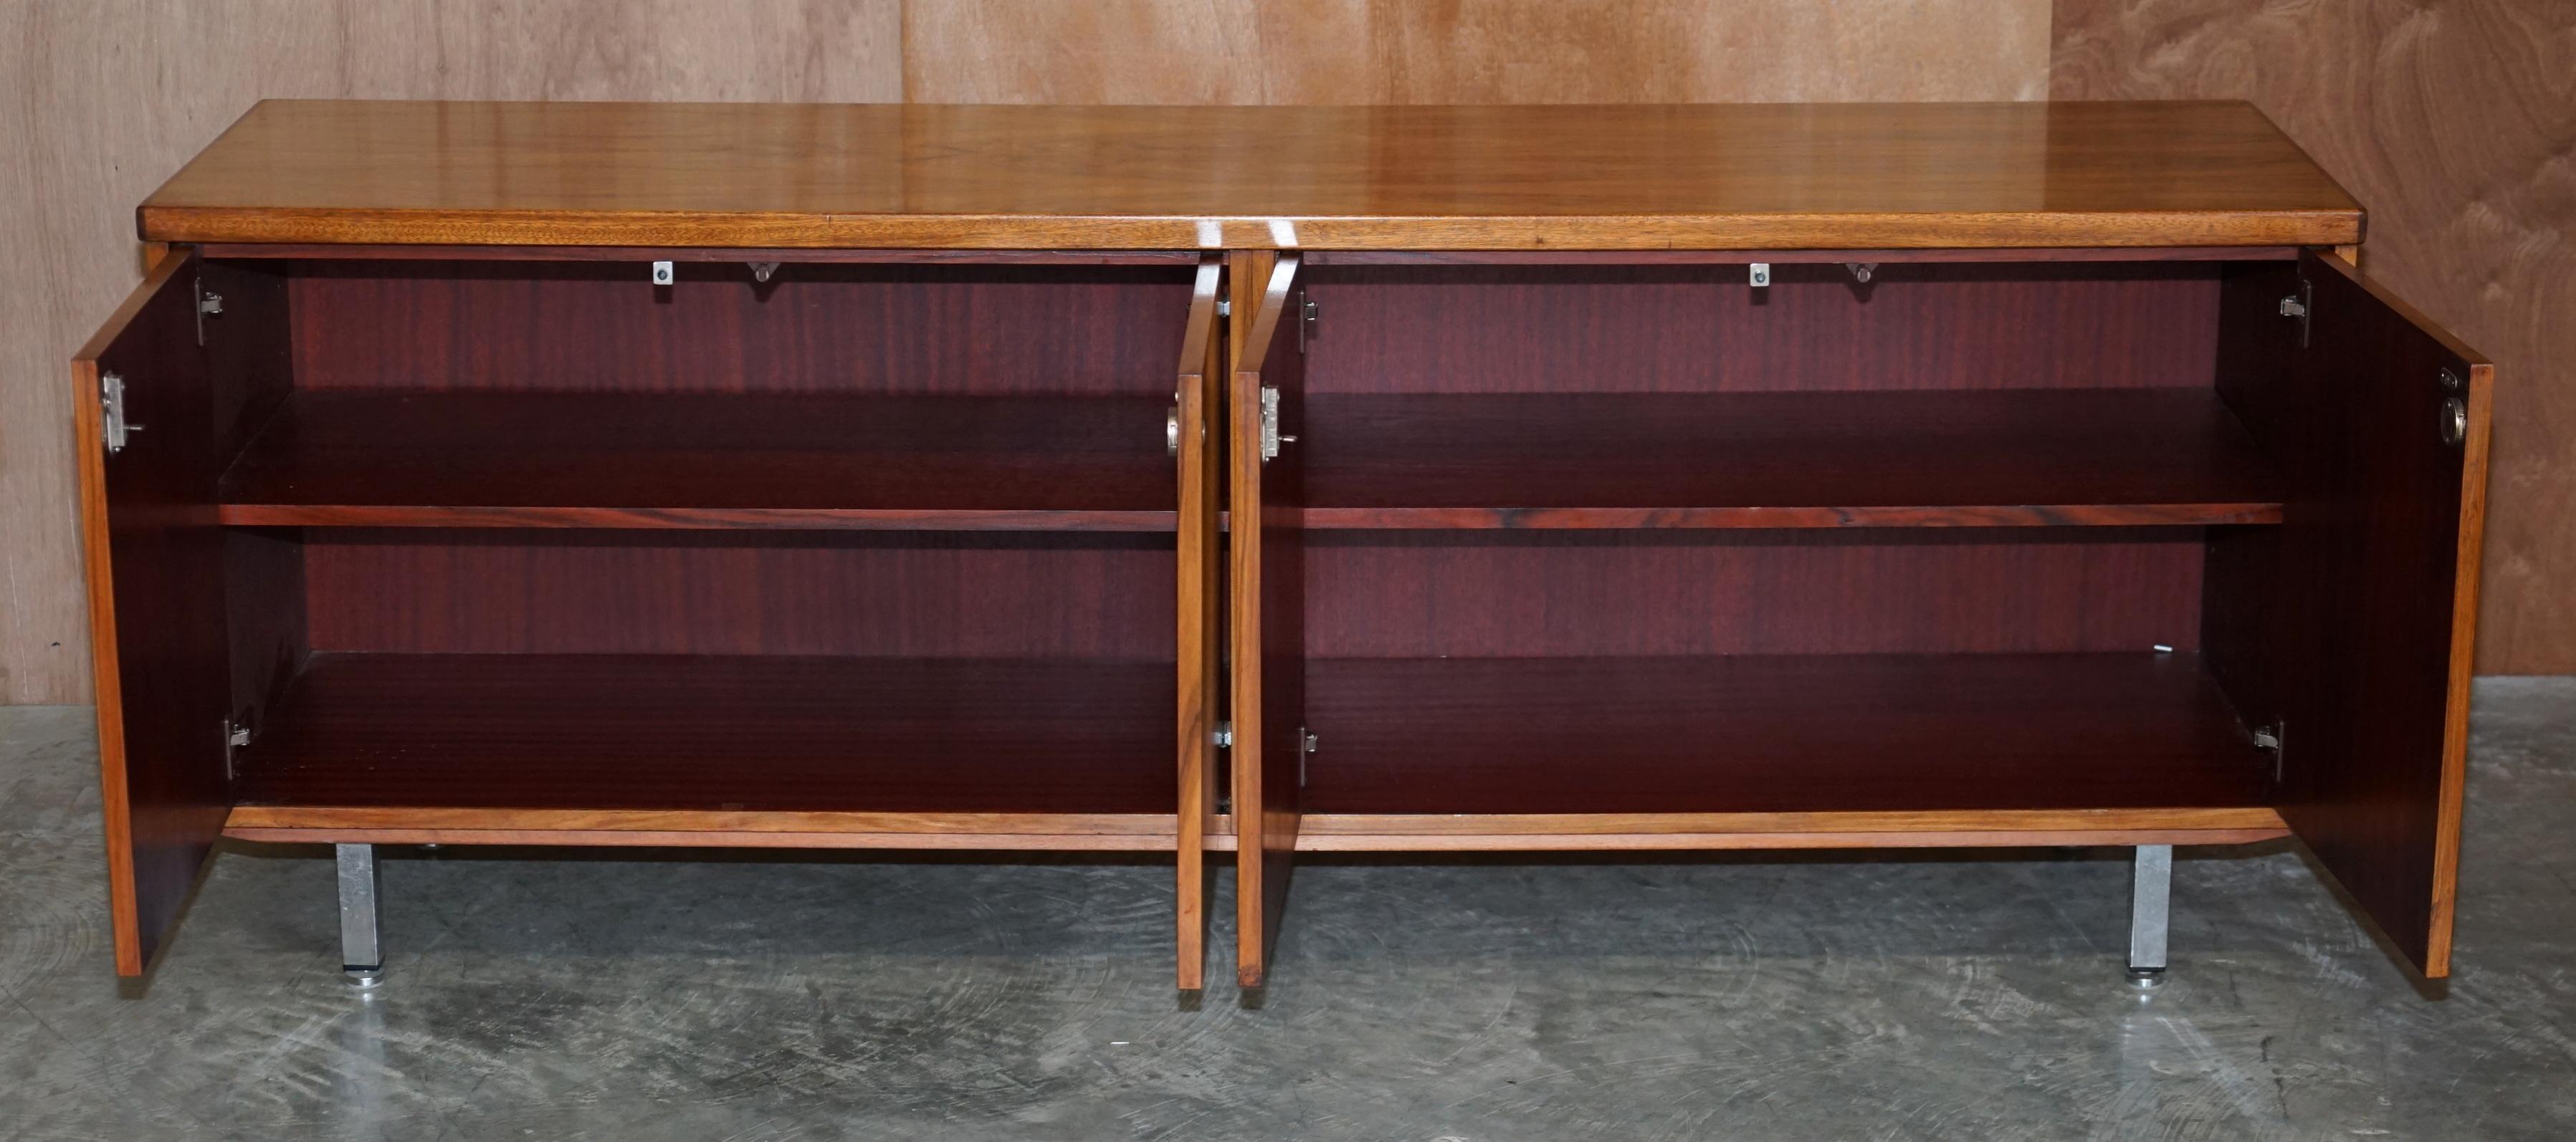 Stunning Restored Mid Century Modern Period Hardwood Sideboard with Chrome Legs For Sale 8